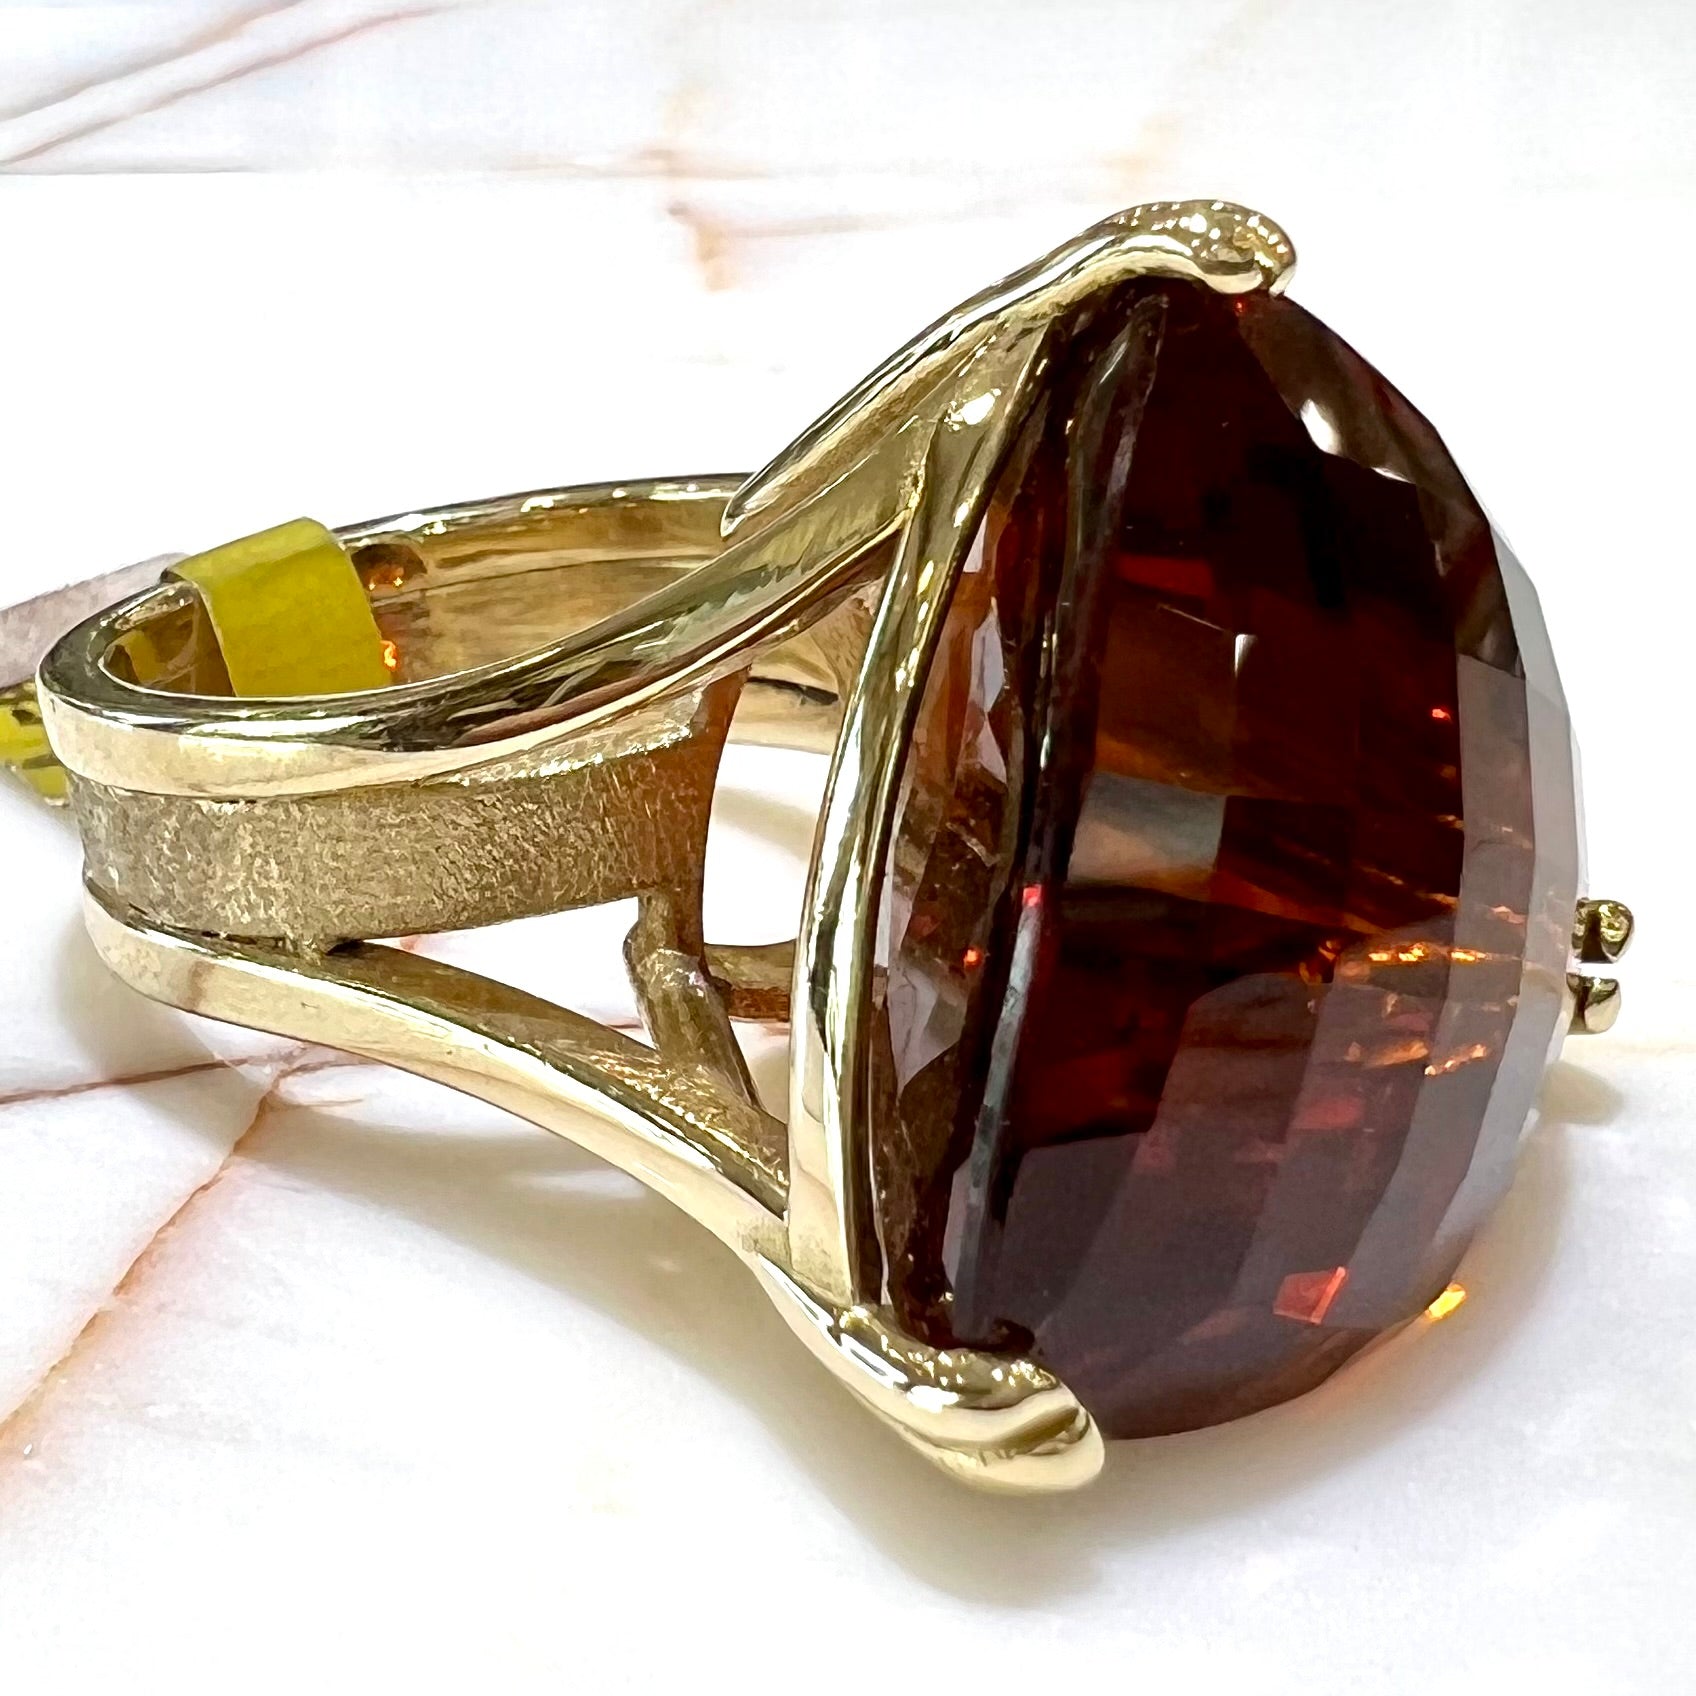 A ladies' trillion cut madeira citrine cocktail ring handmade in yellow gold.